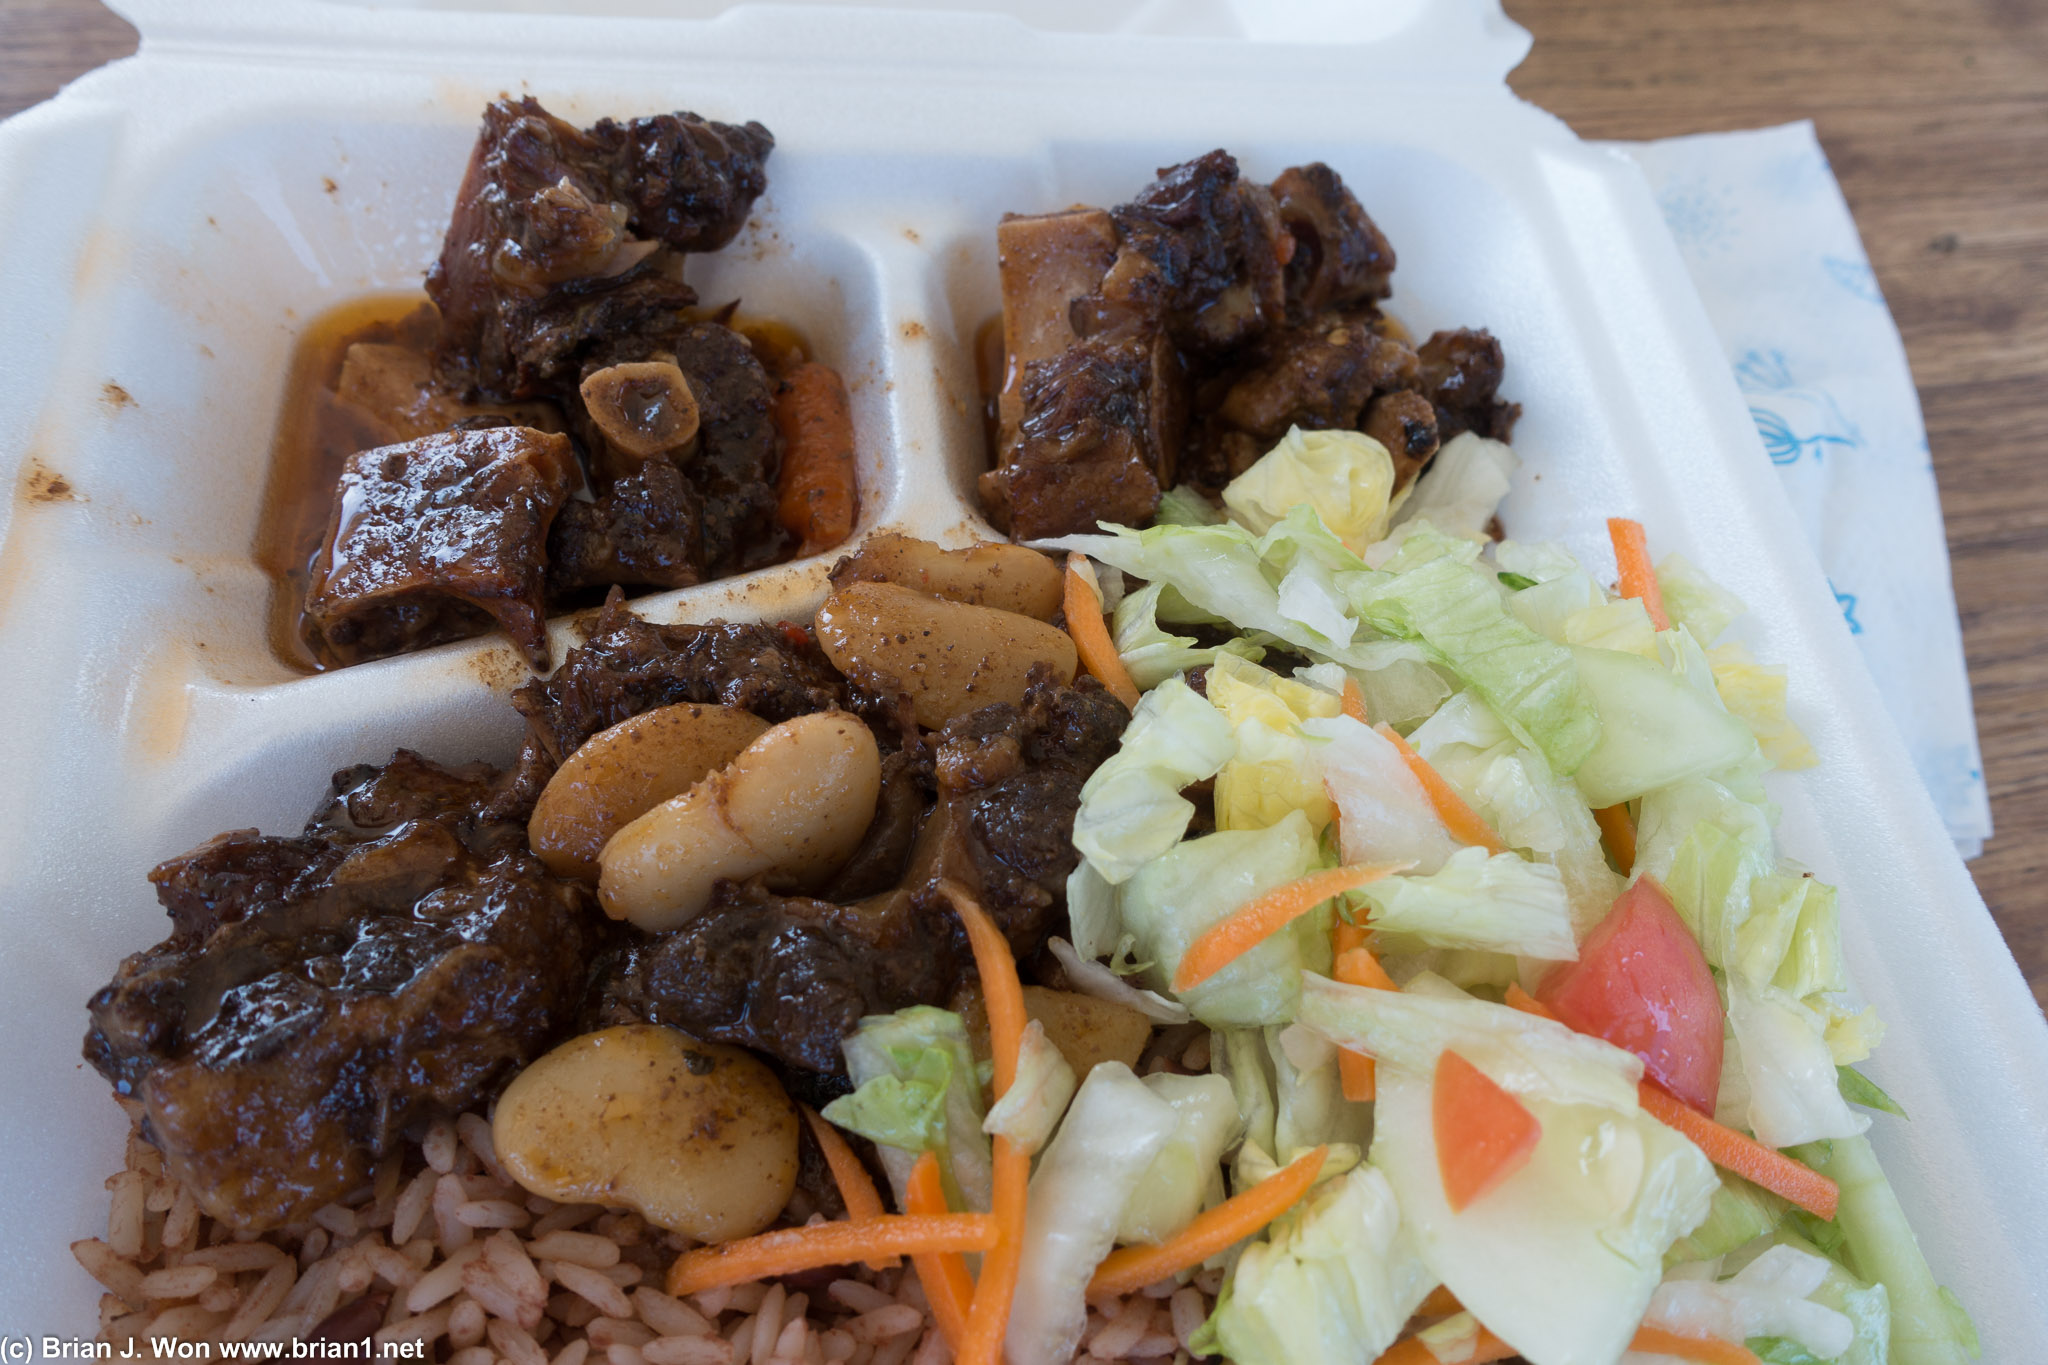 Oxtail. So good!